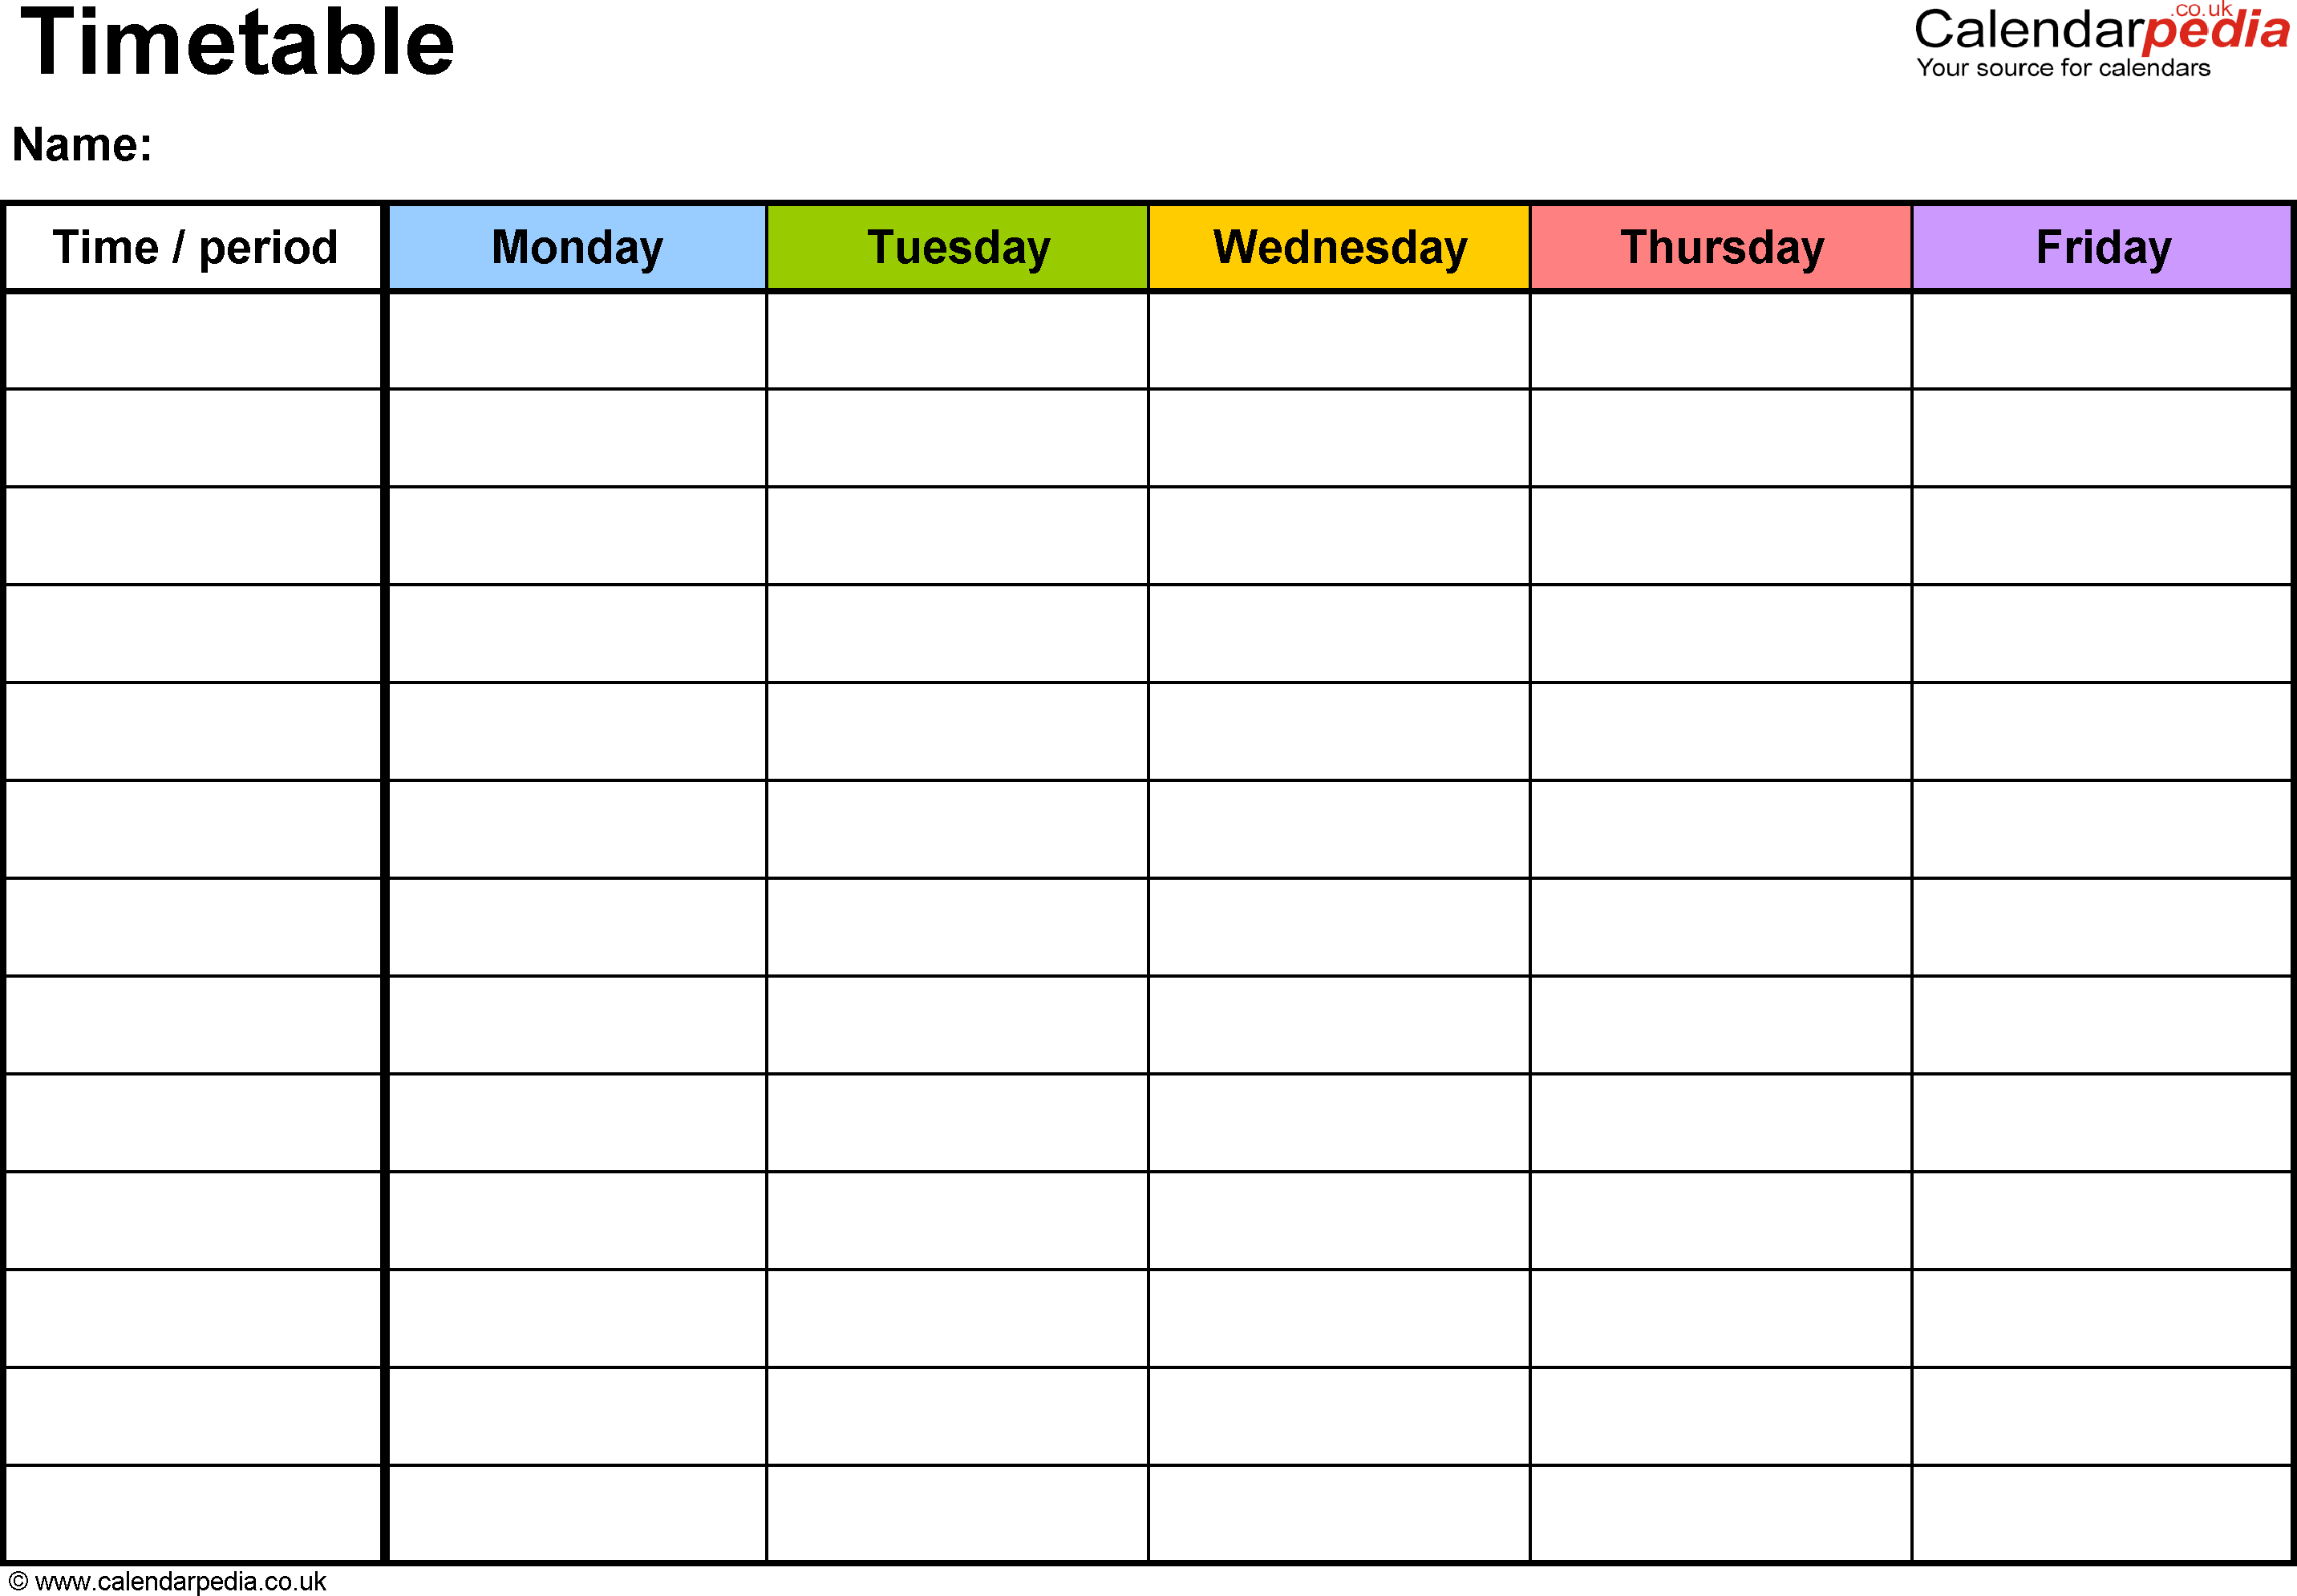 Timetable templates for Microsoft Word - free and printable In Blank Revision Timetable Template